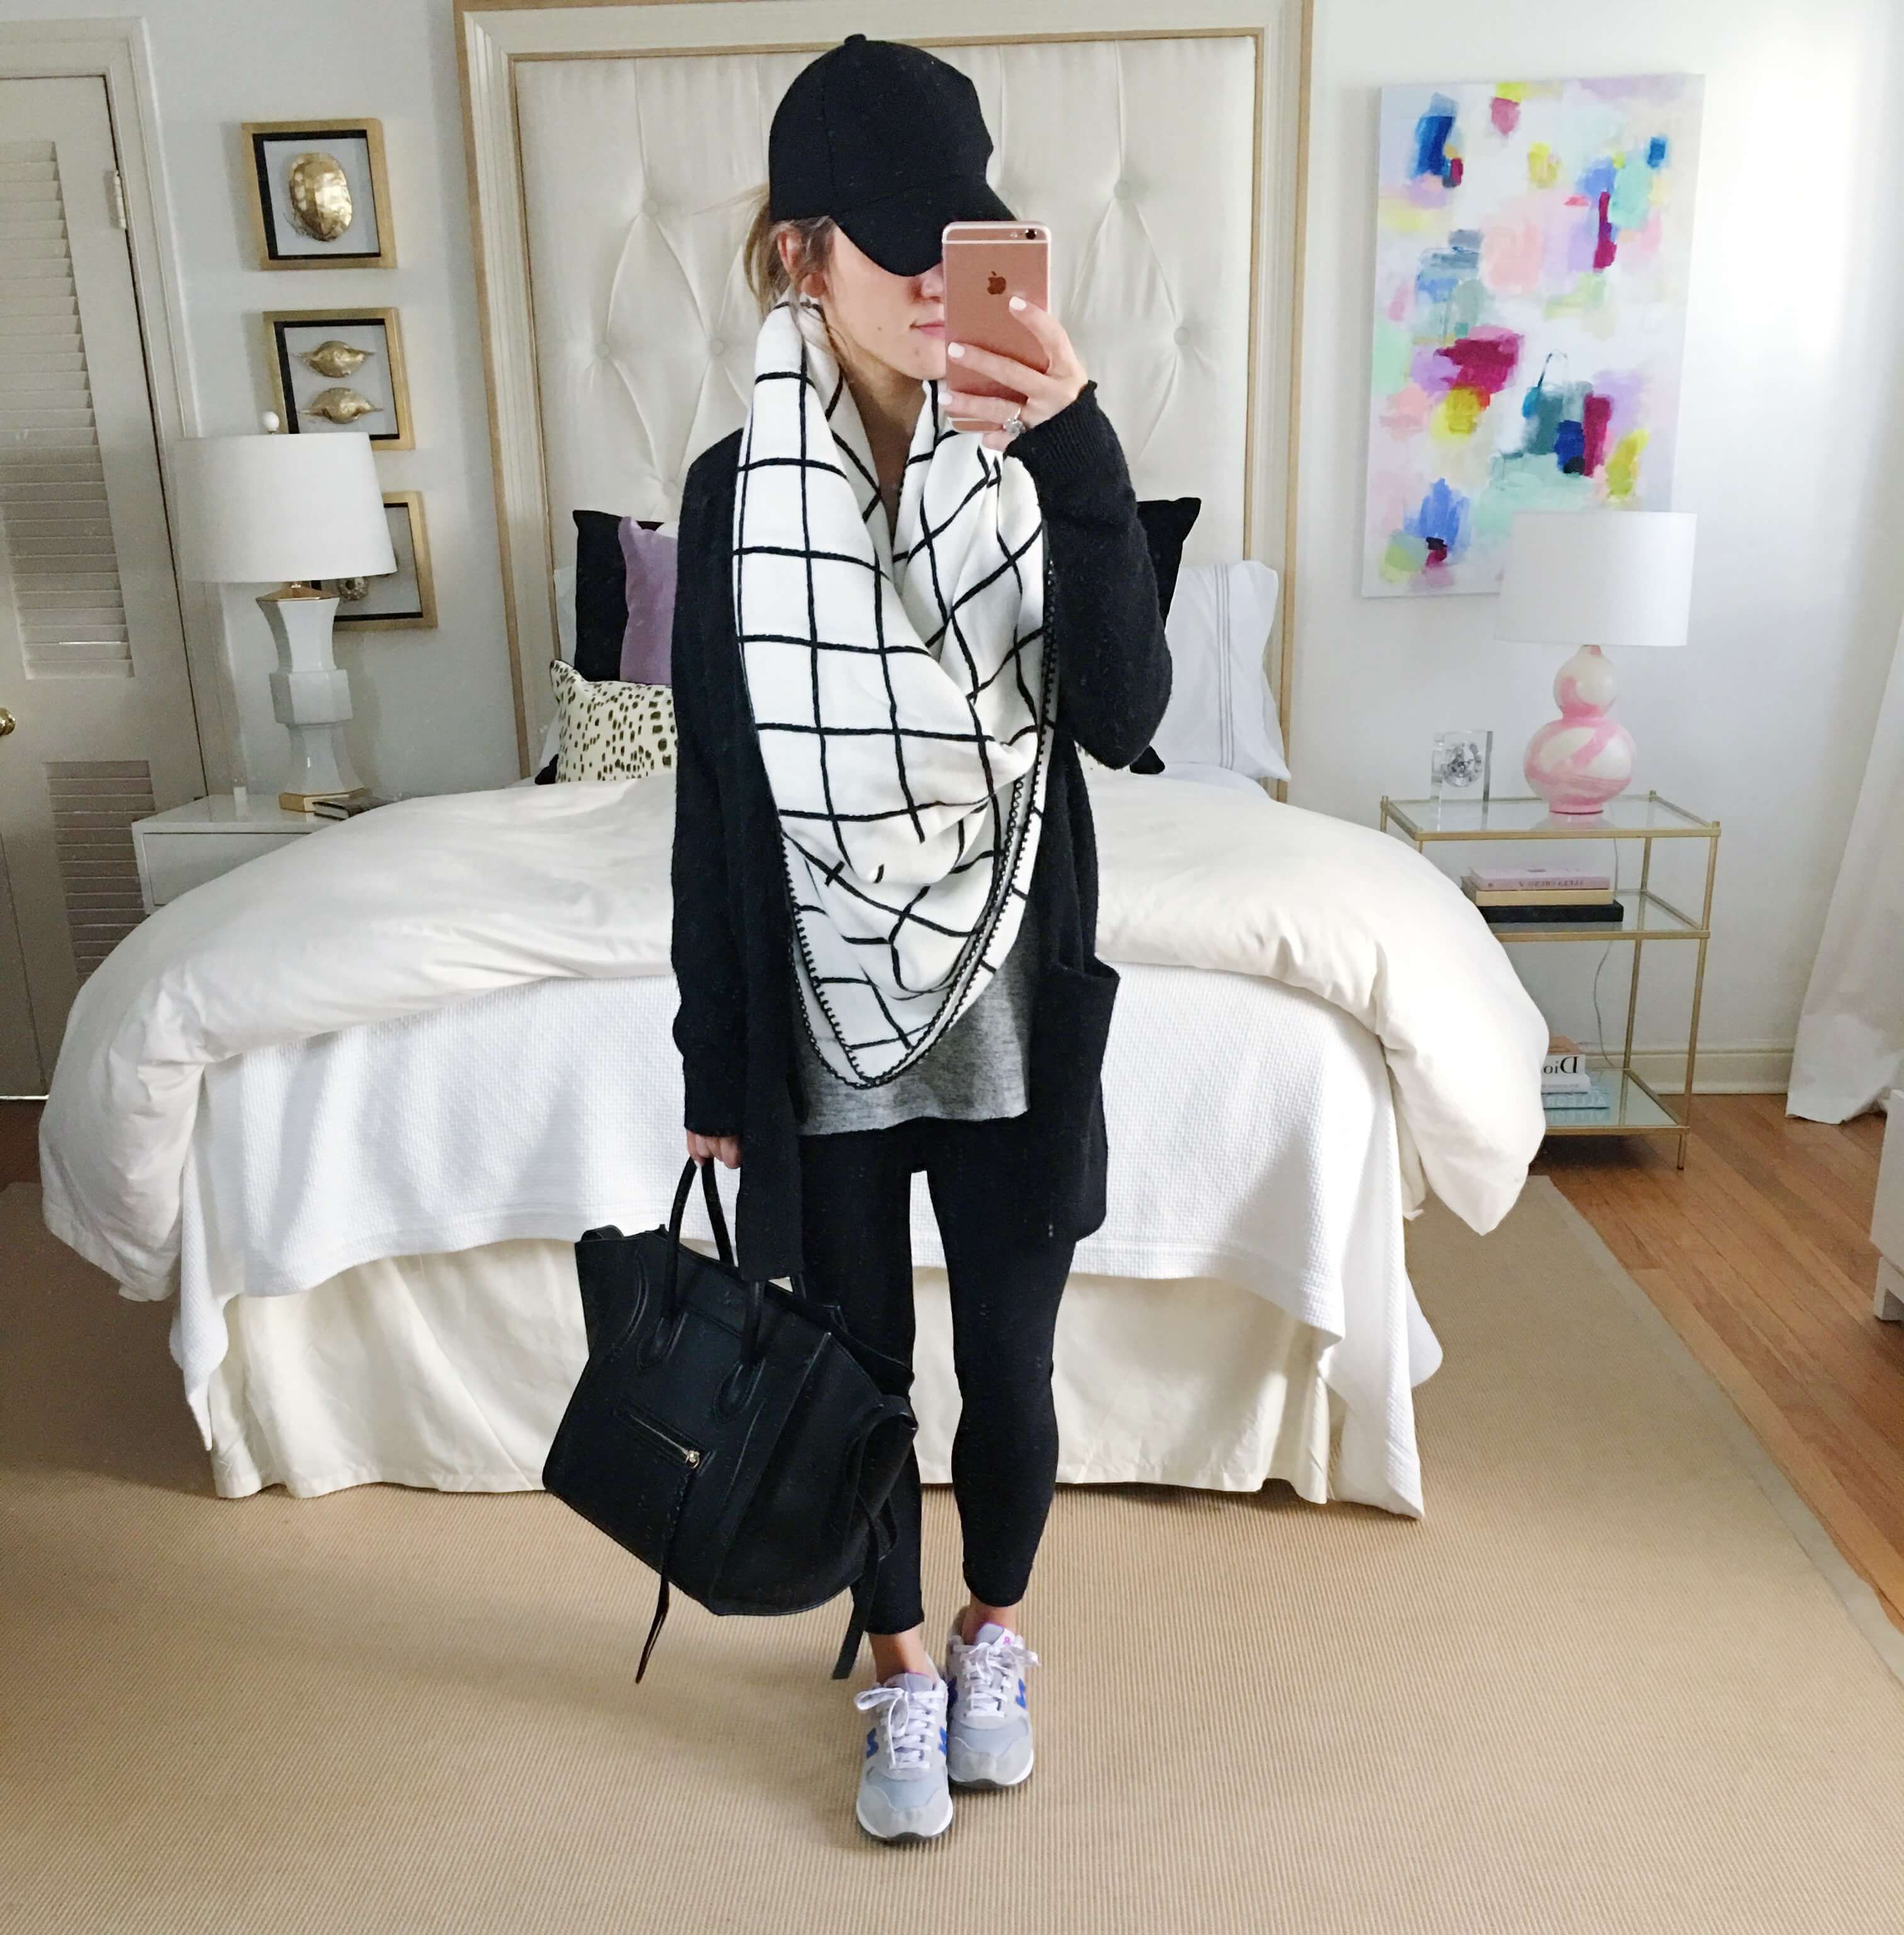 what to wear with leggings, leggings travel outfit, comfy casual outfit leggings and sneakers, denim jacket, babeball cap, celine bag